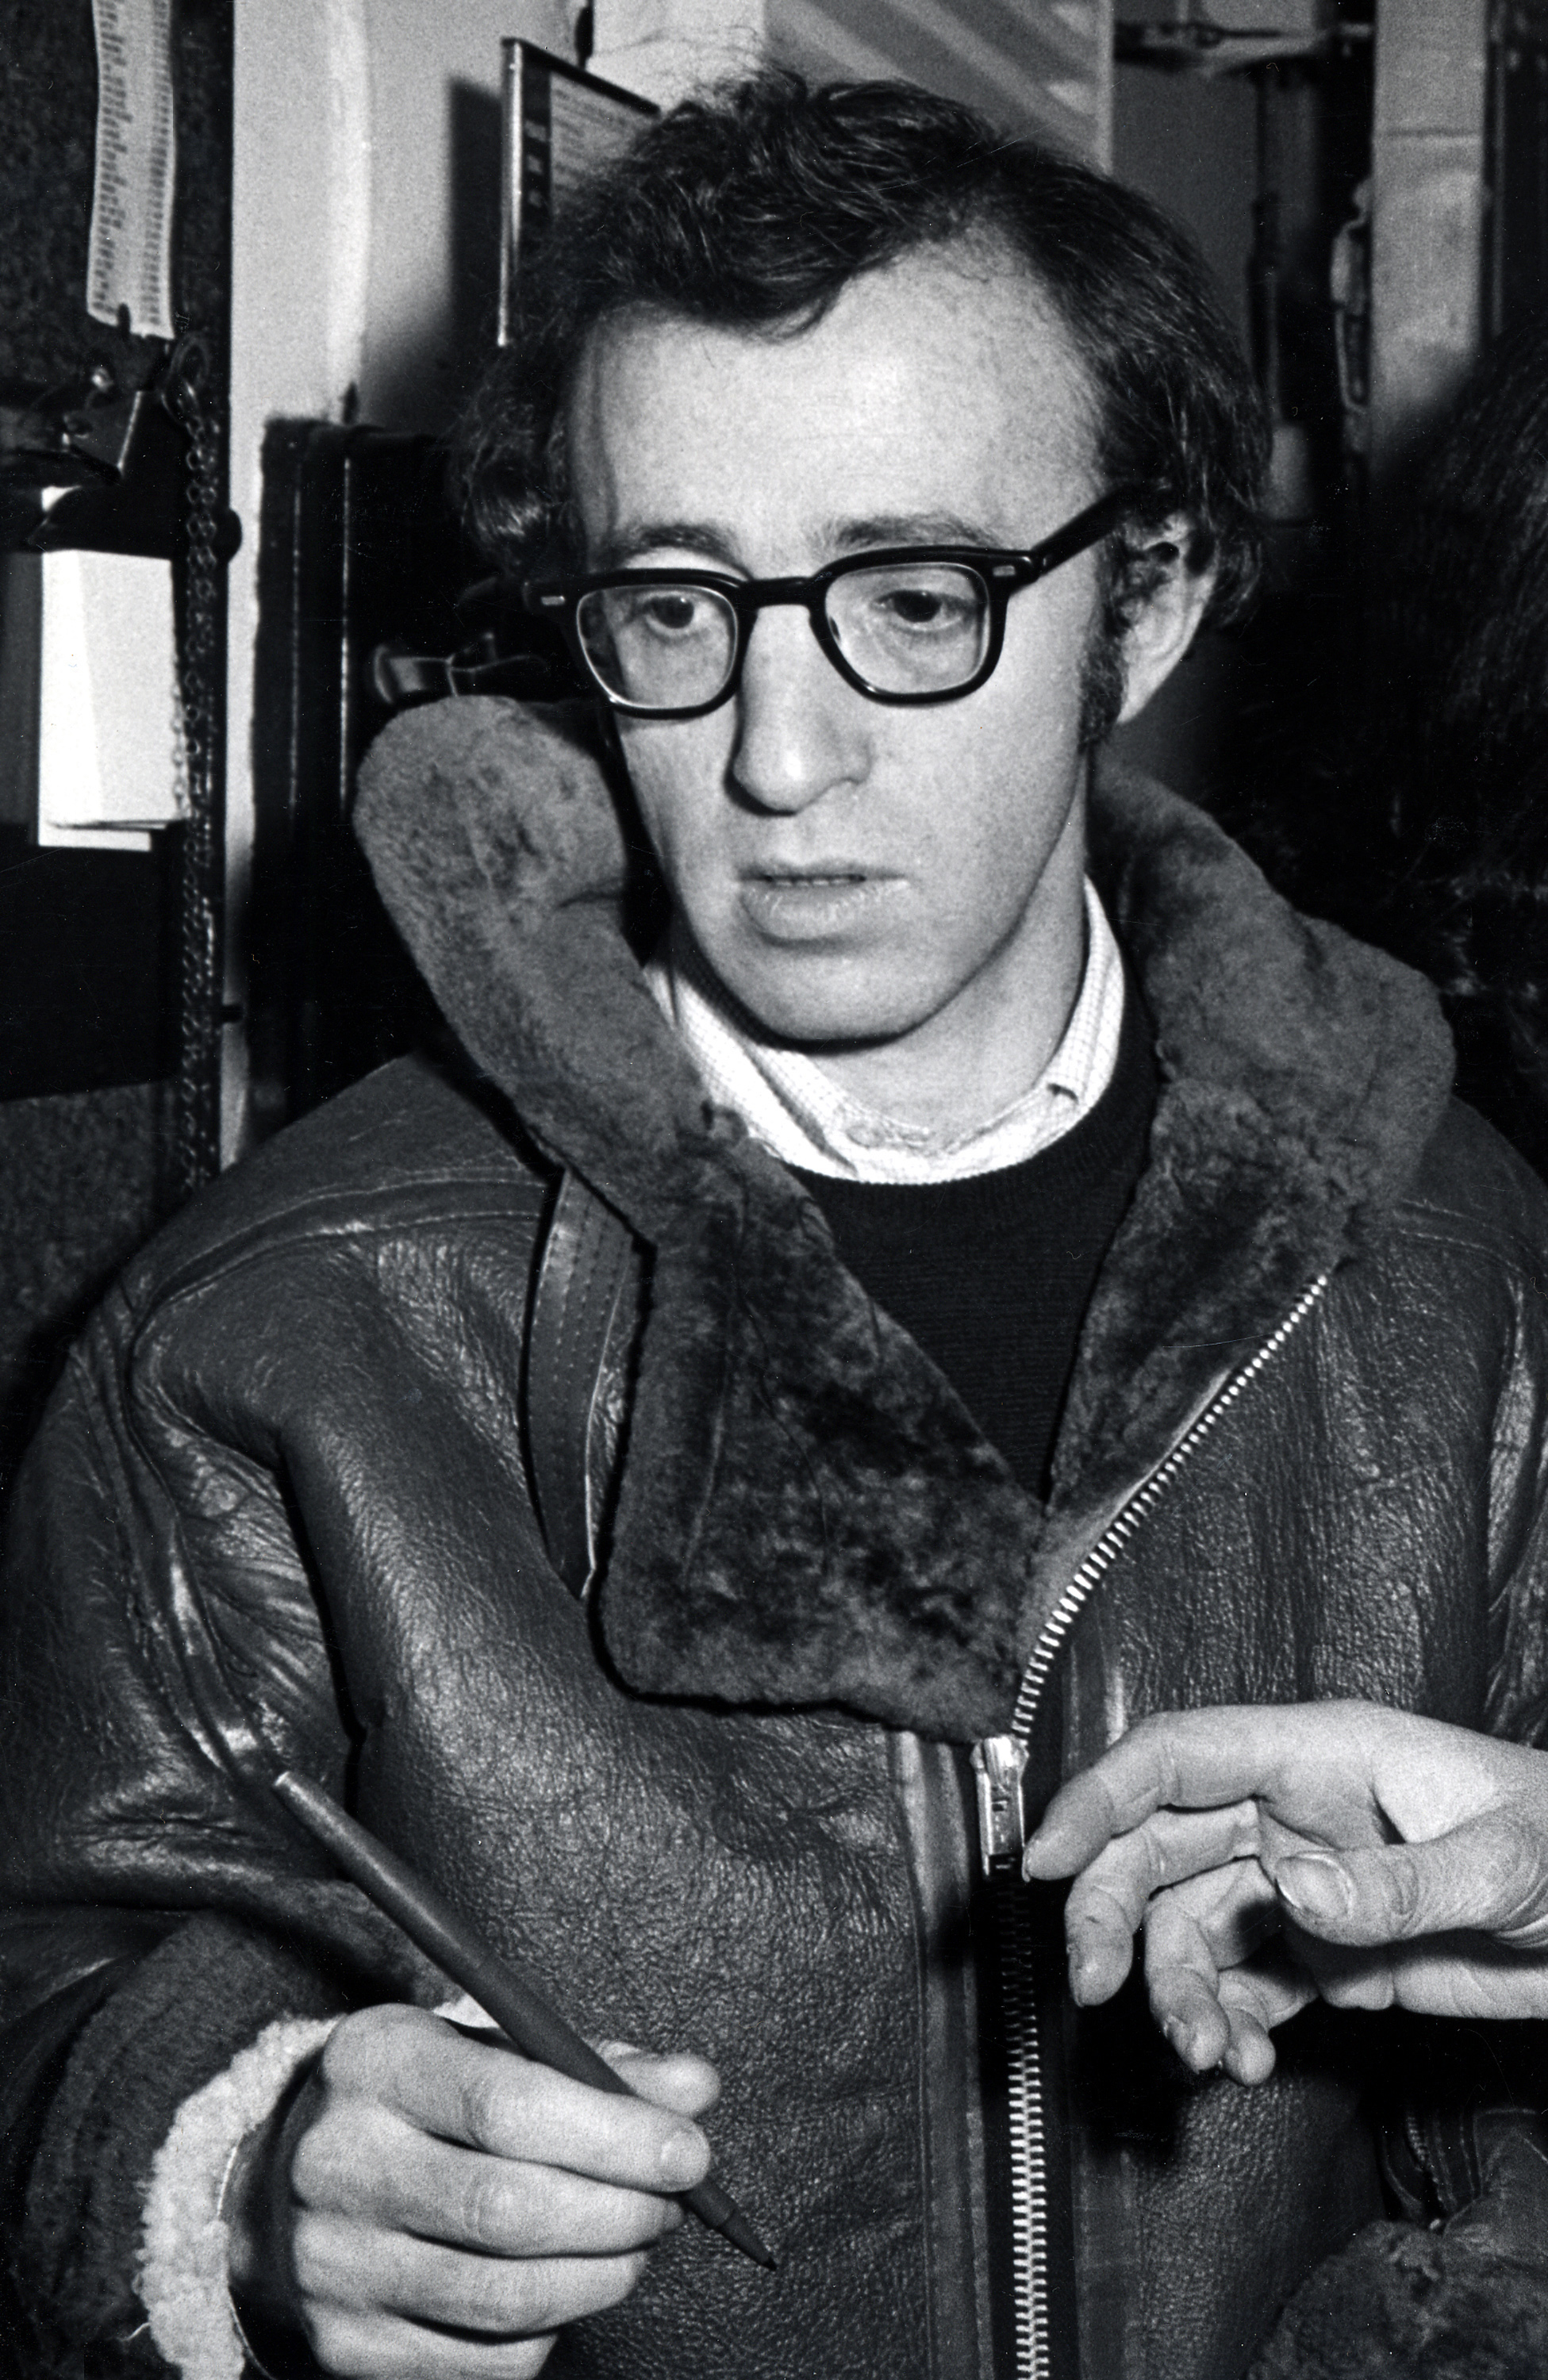 Woody Allen during opening of "Play It Again Sam" on February 12, 1969, in New York City. | Source: Getty Images